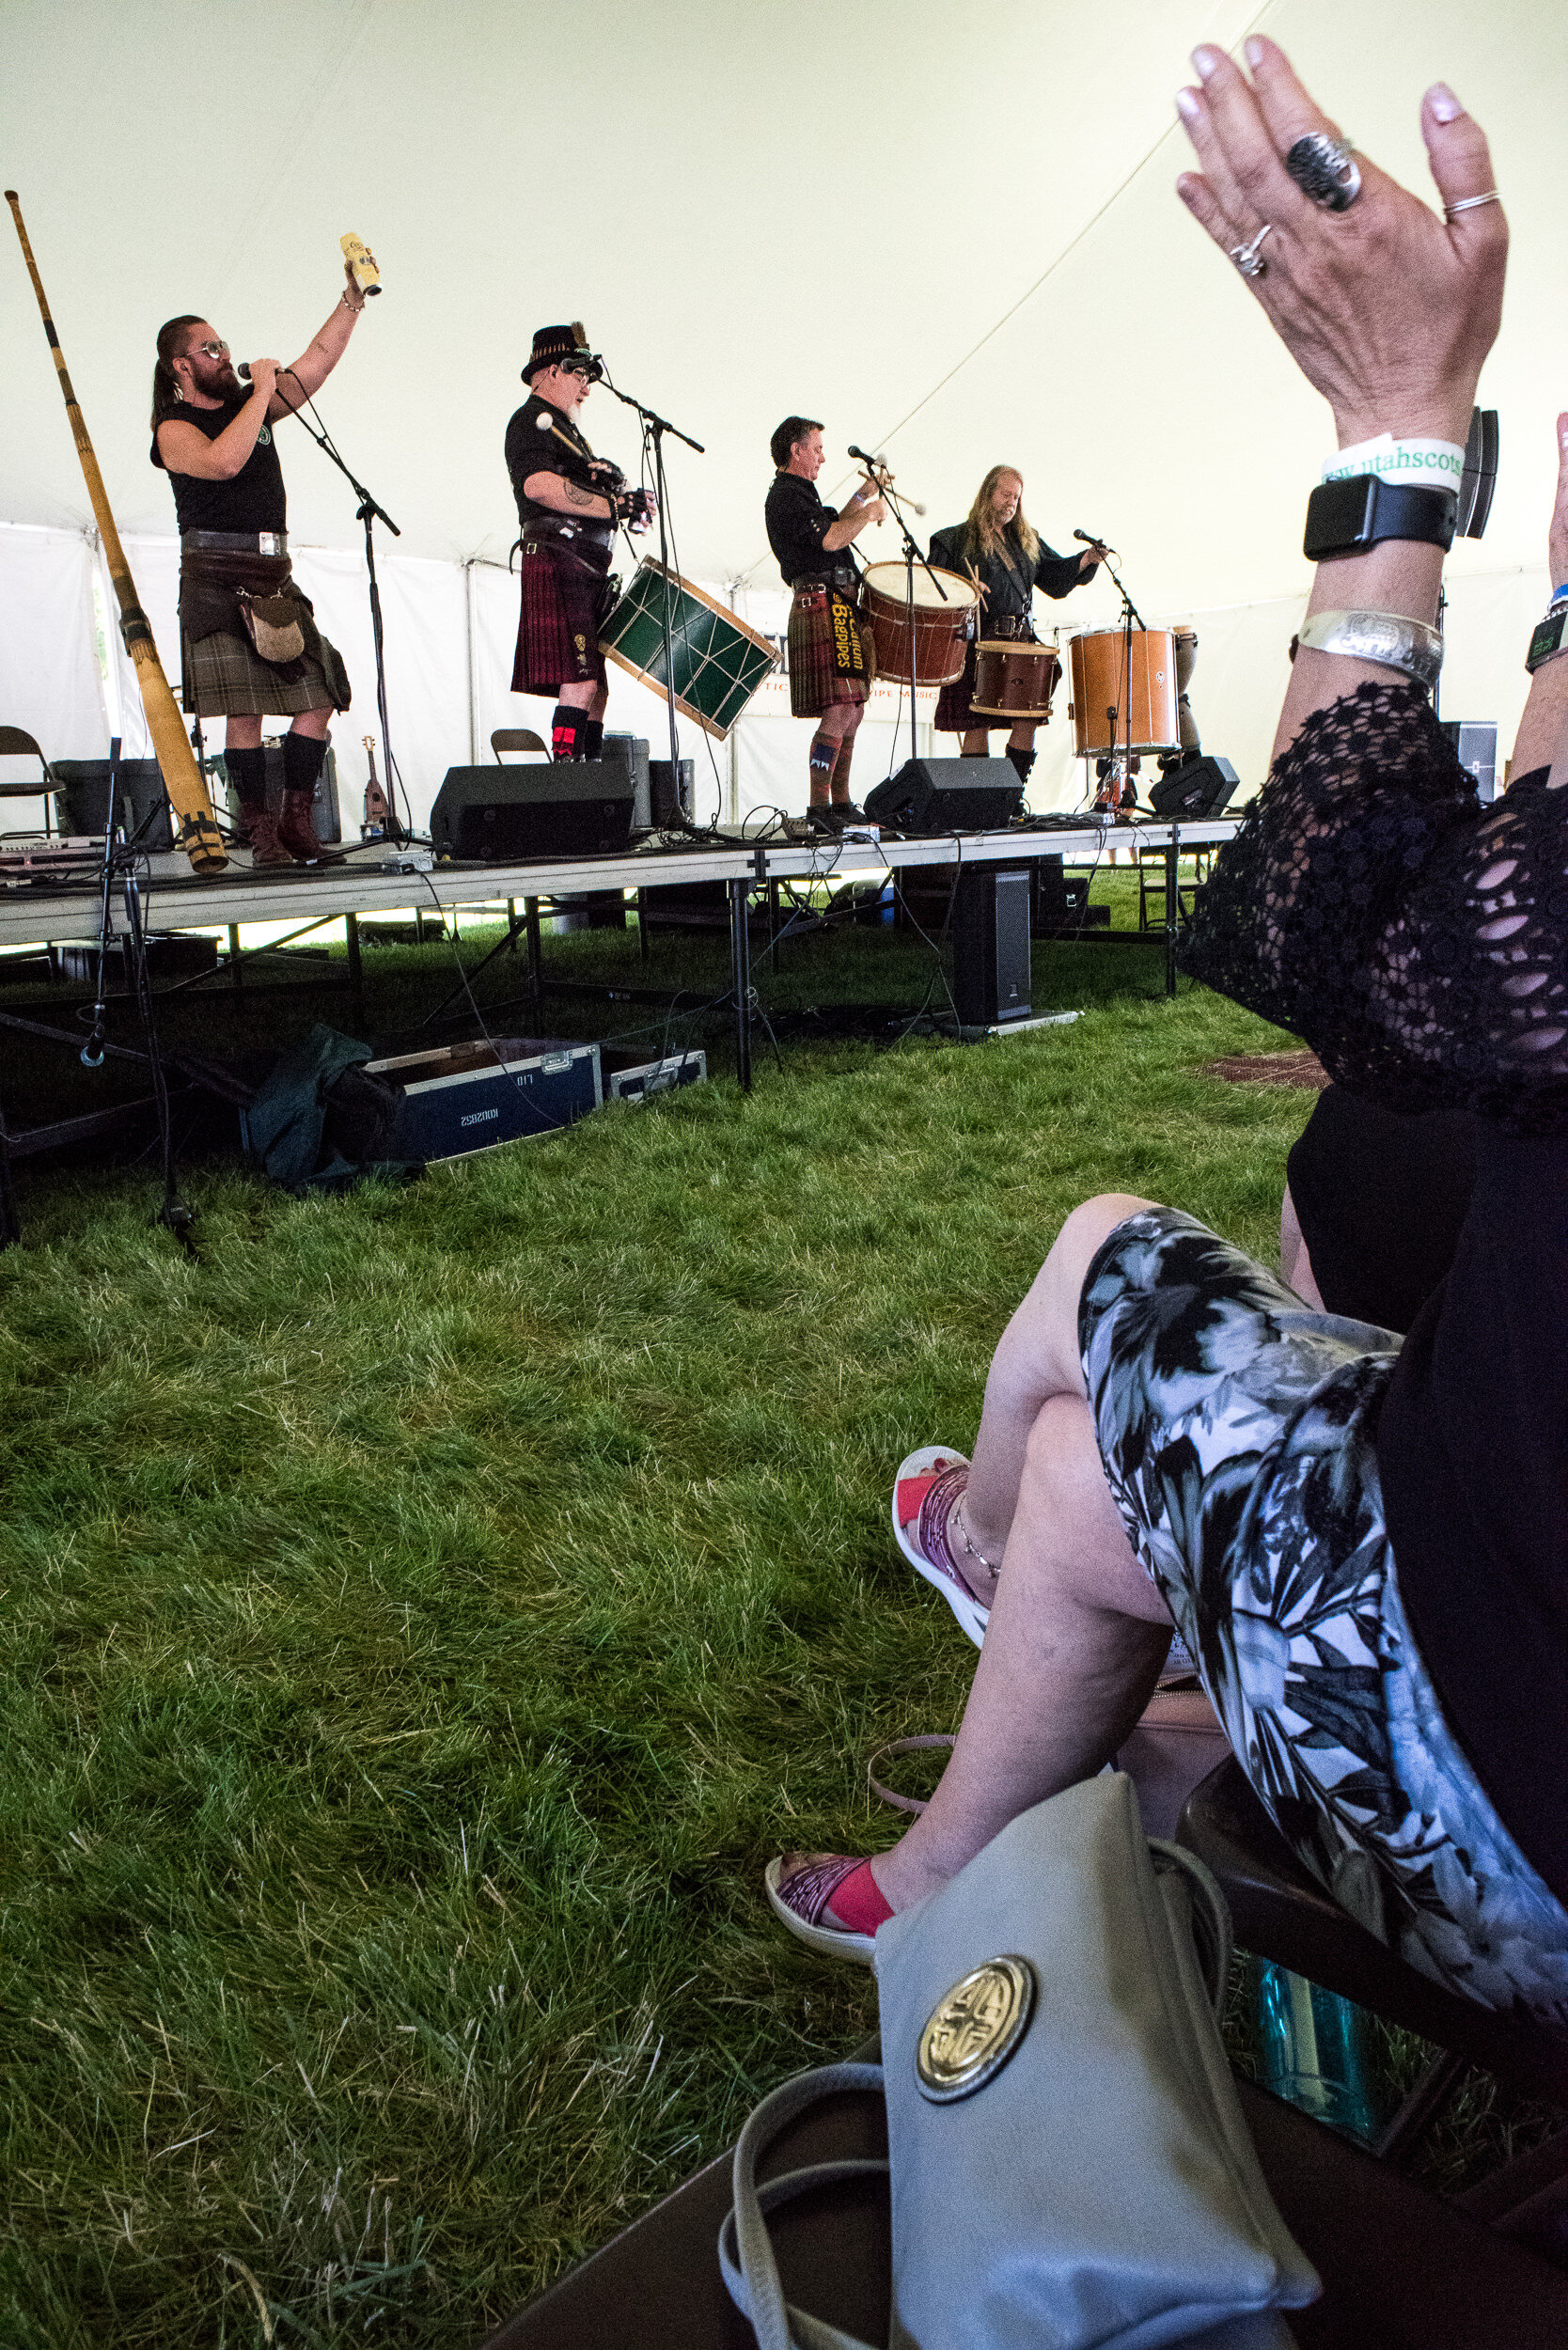 utah scottish festival highland games wicked tinkers clapping molly menschel WEB-1.jpg